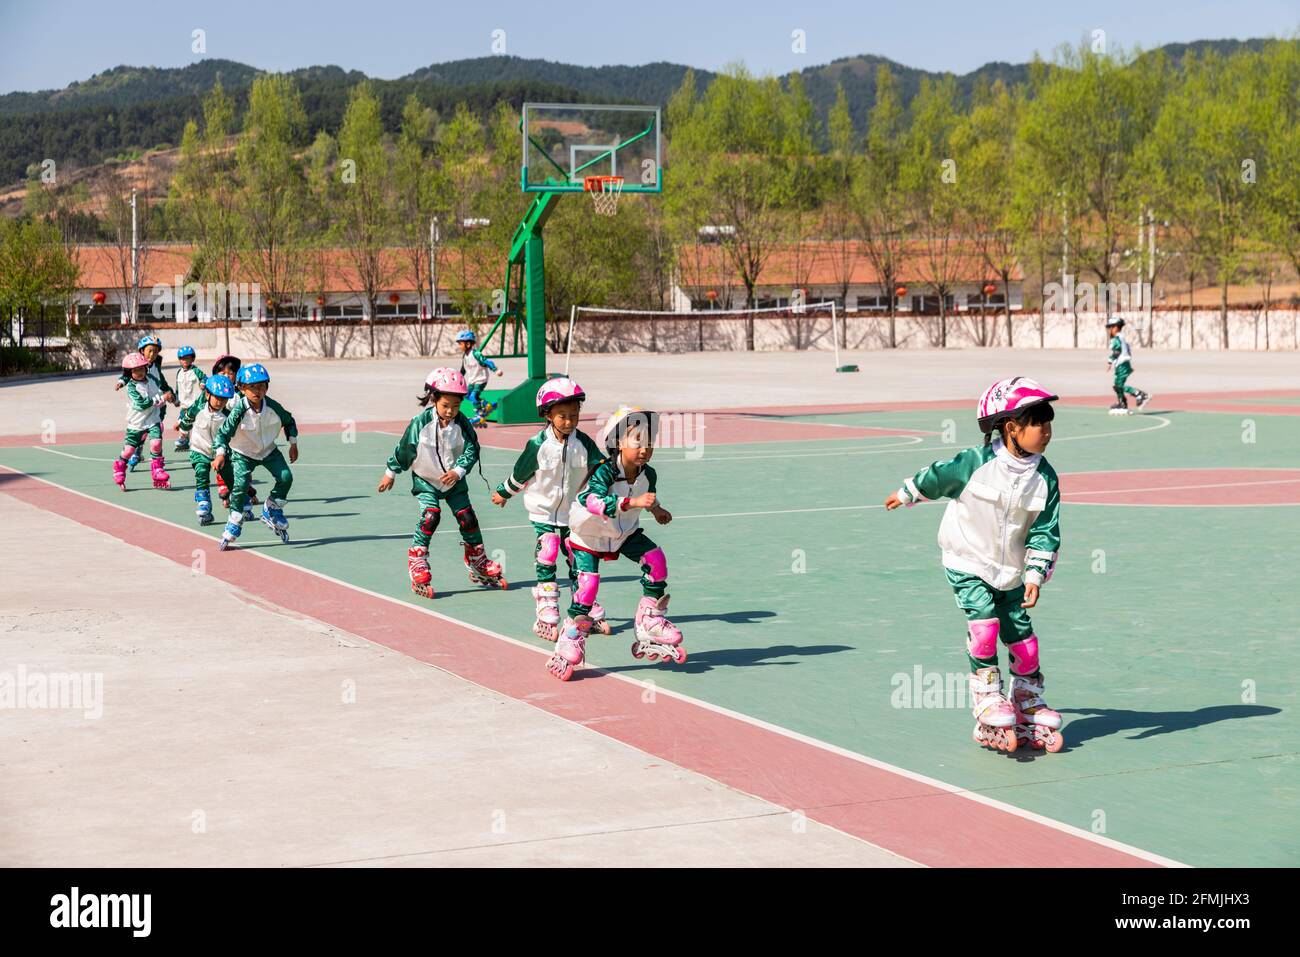 Students at BoAi school in Shanxi practice rollerblading around the basketball court. Stock Photo